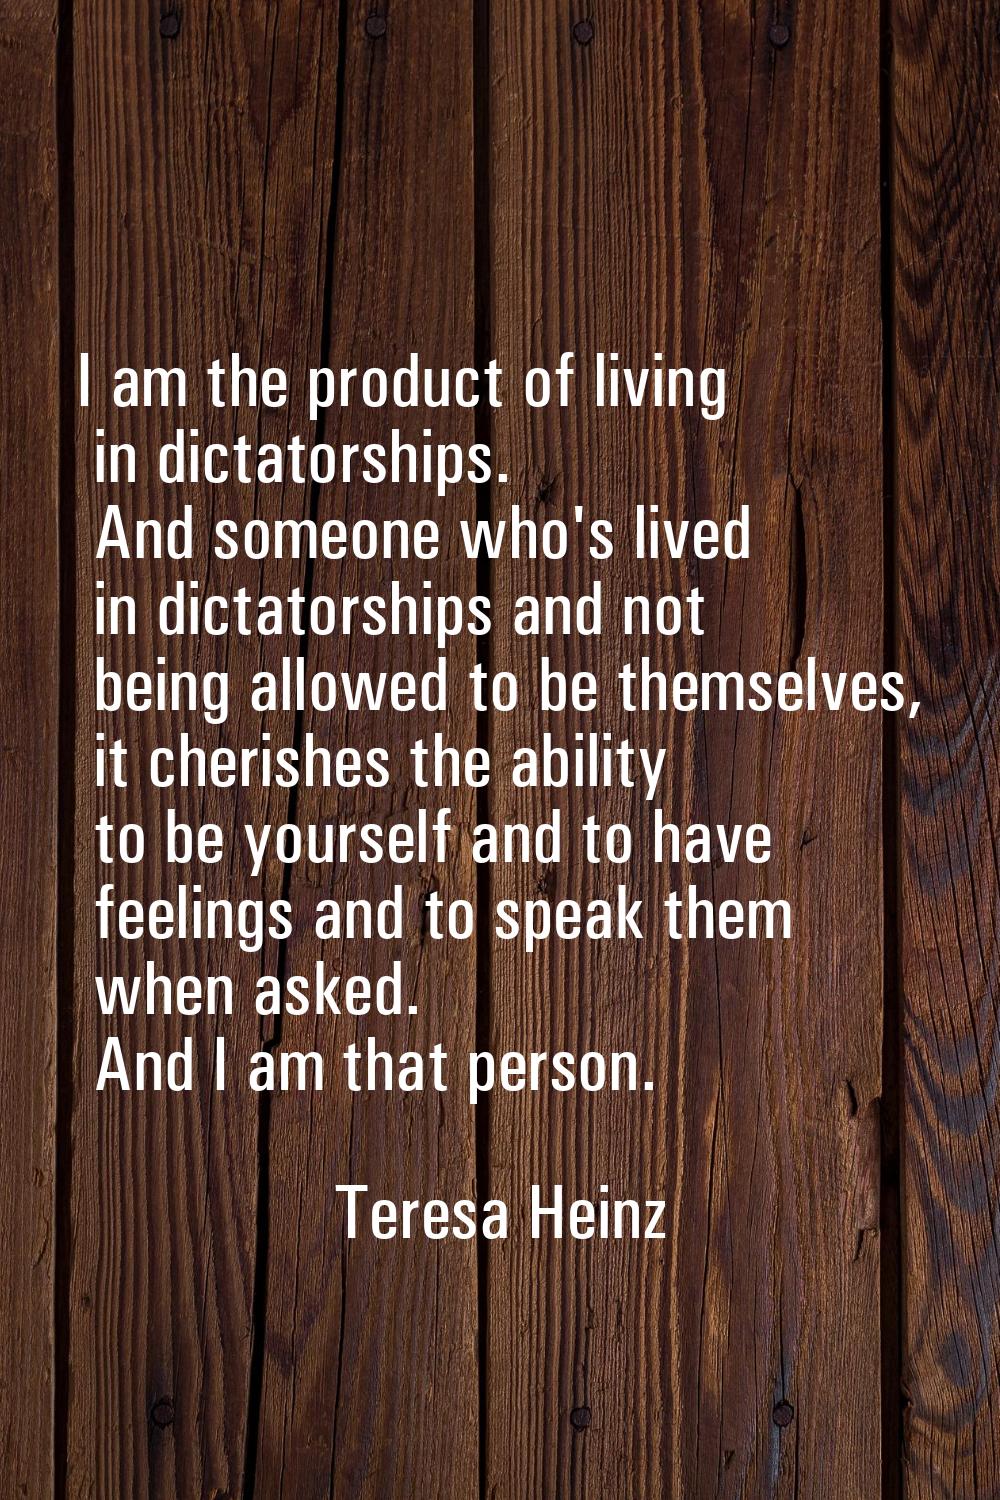 I am the product of living in dictatorships. And someone who's lived in dictatorships and not being